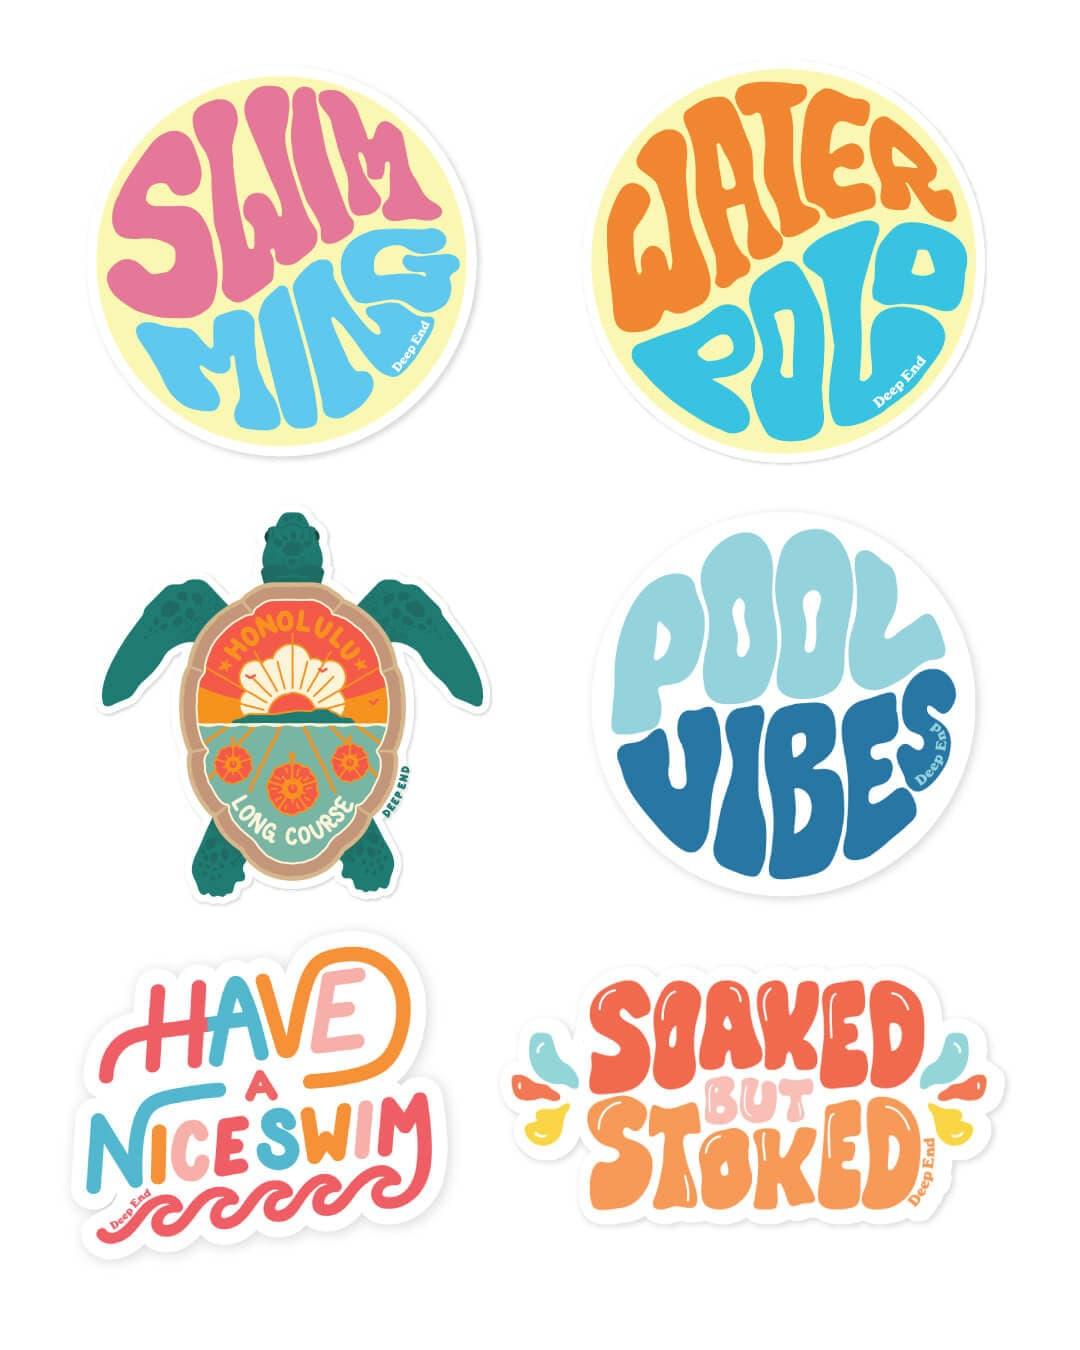 Shenanigans Water Polo Sticker Pack - DEEP-END